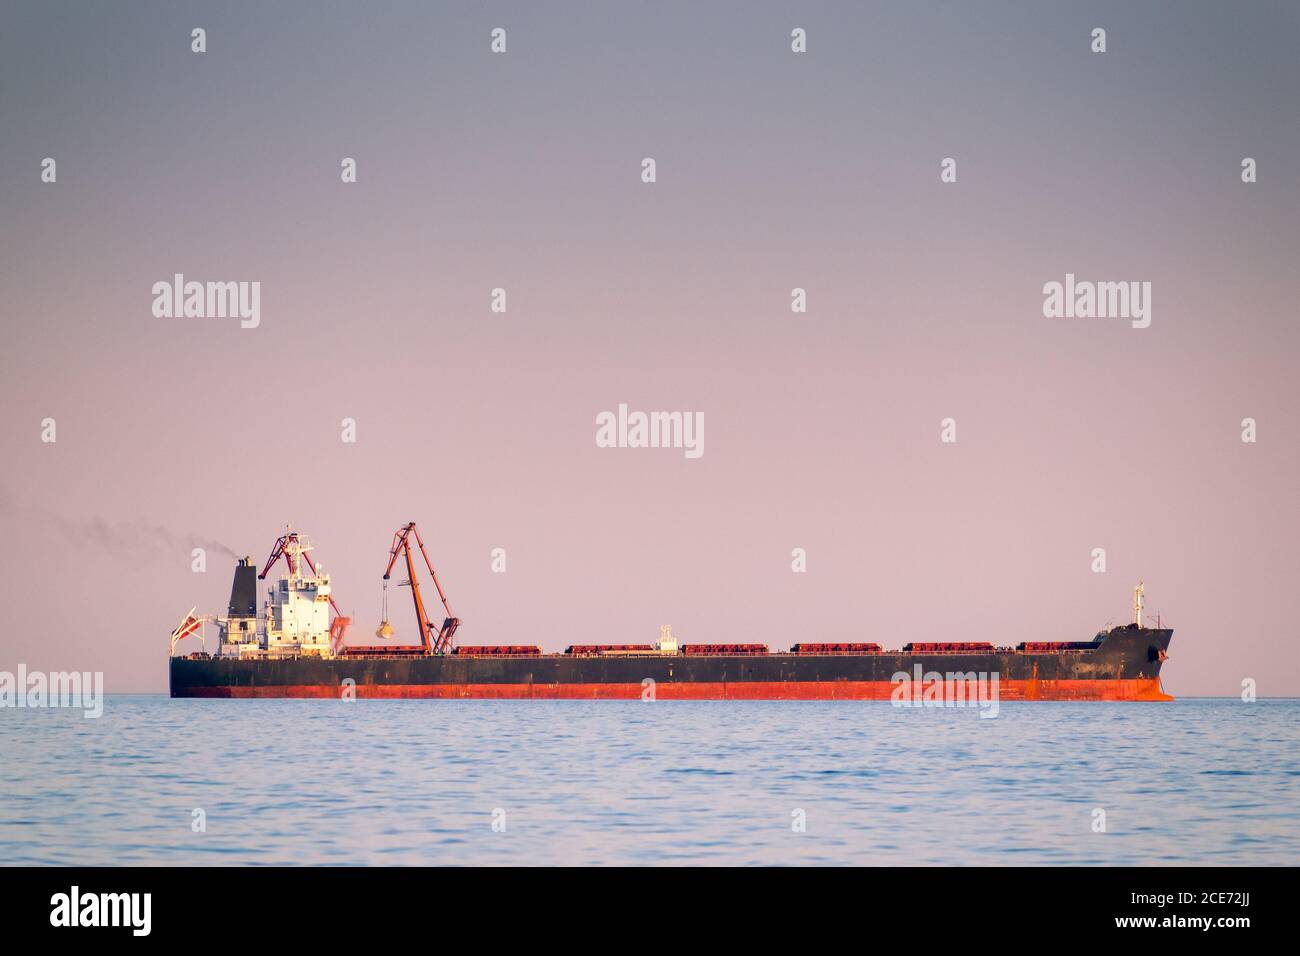 Bulk carrier ship at sea in calm weather on sunset Stock Photo